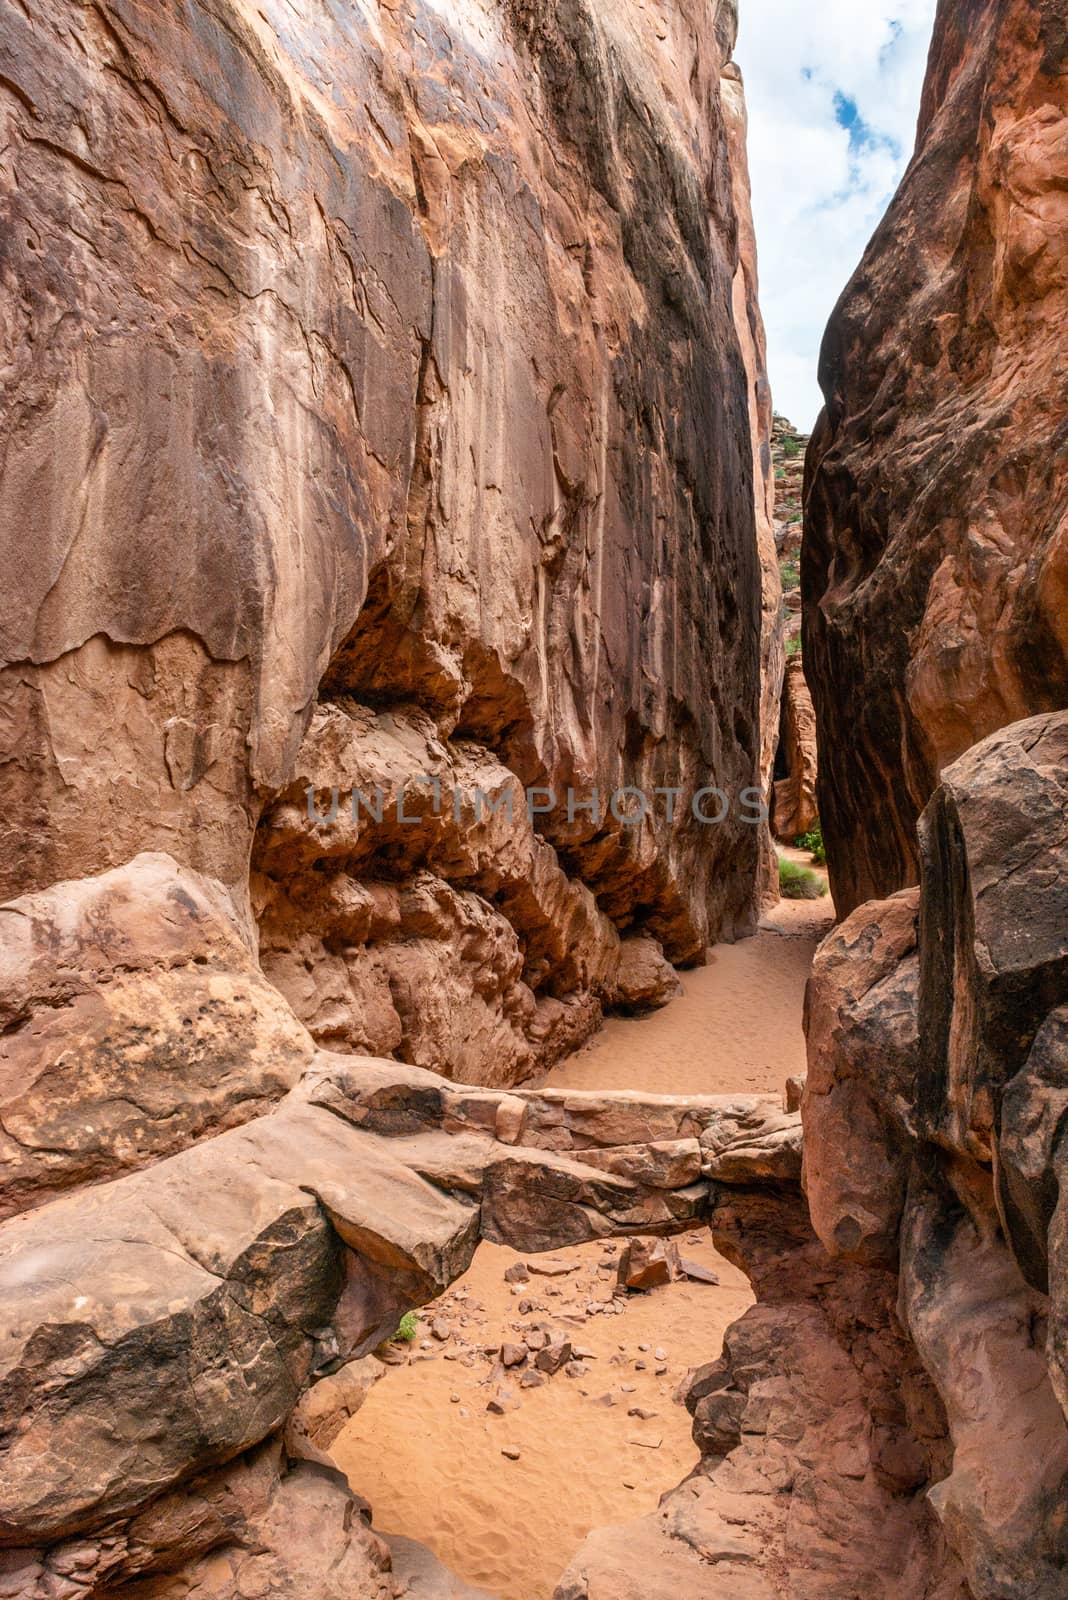 Sandstone bridge in a slot canyon in Fiery Furnace, Arches National Park, Utah by Njean